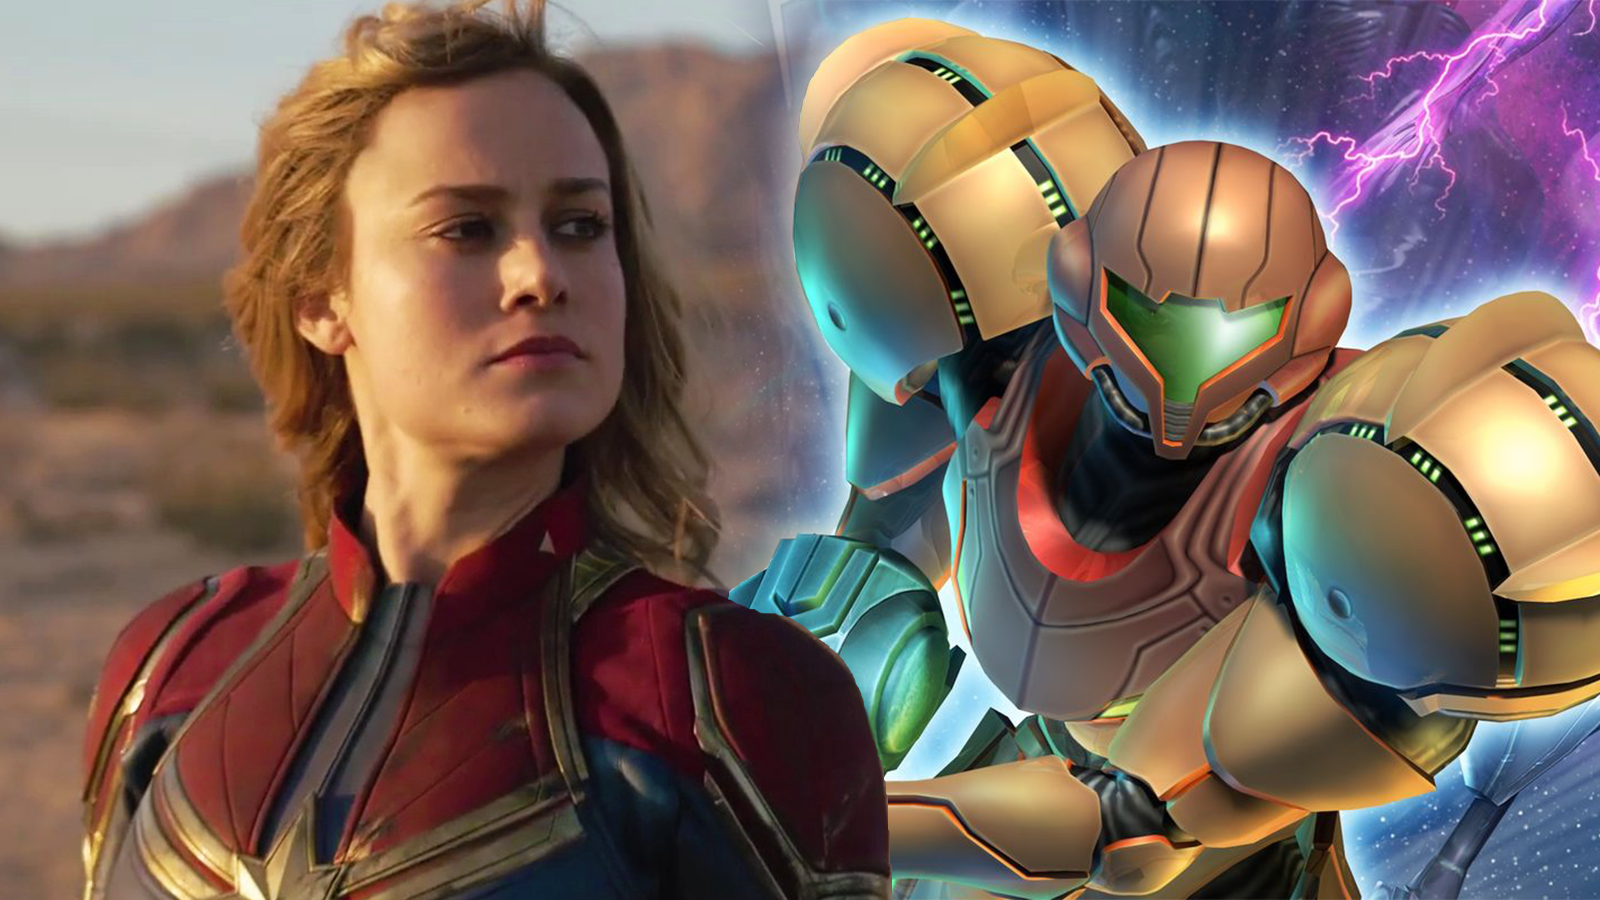 Actresses who could play a great Samus in a potential movie or